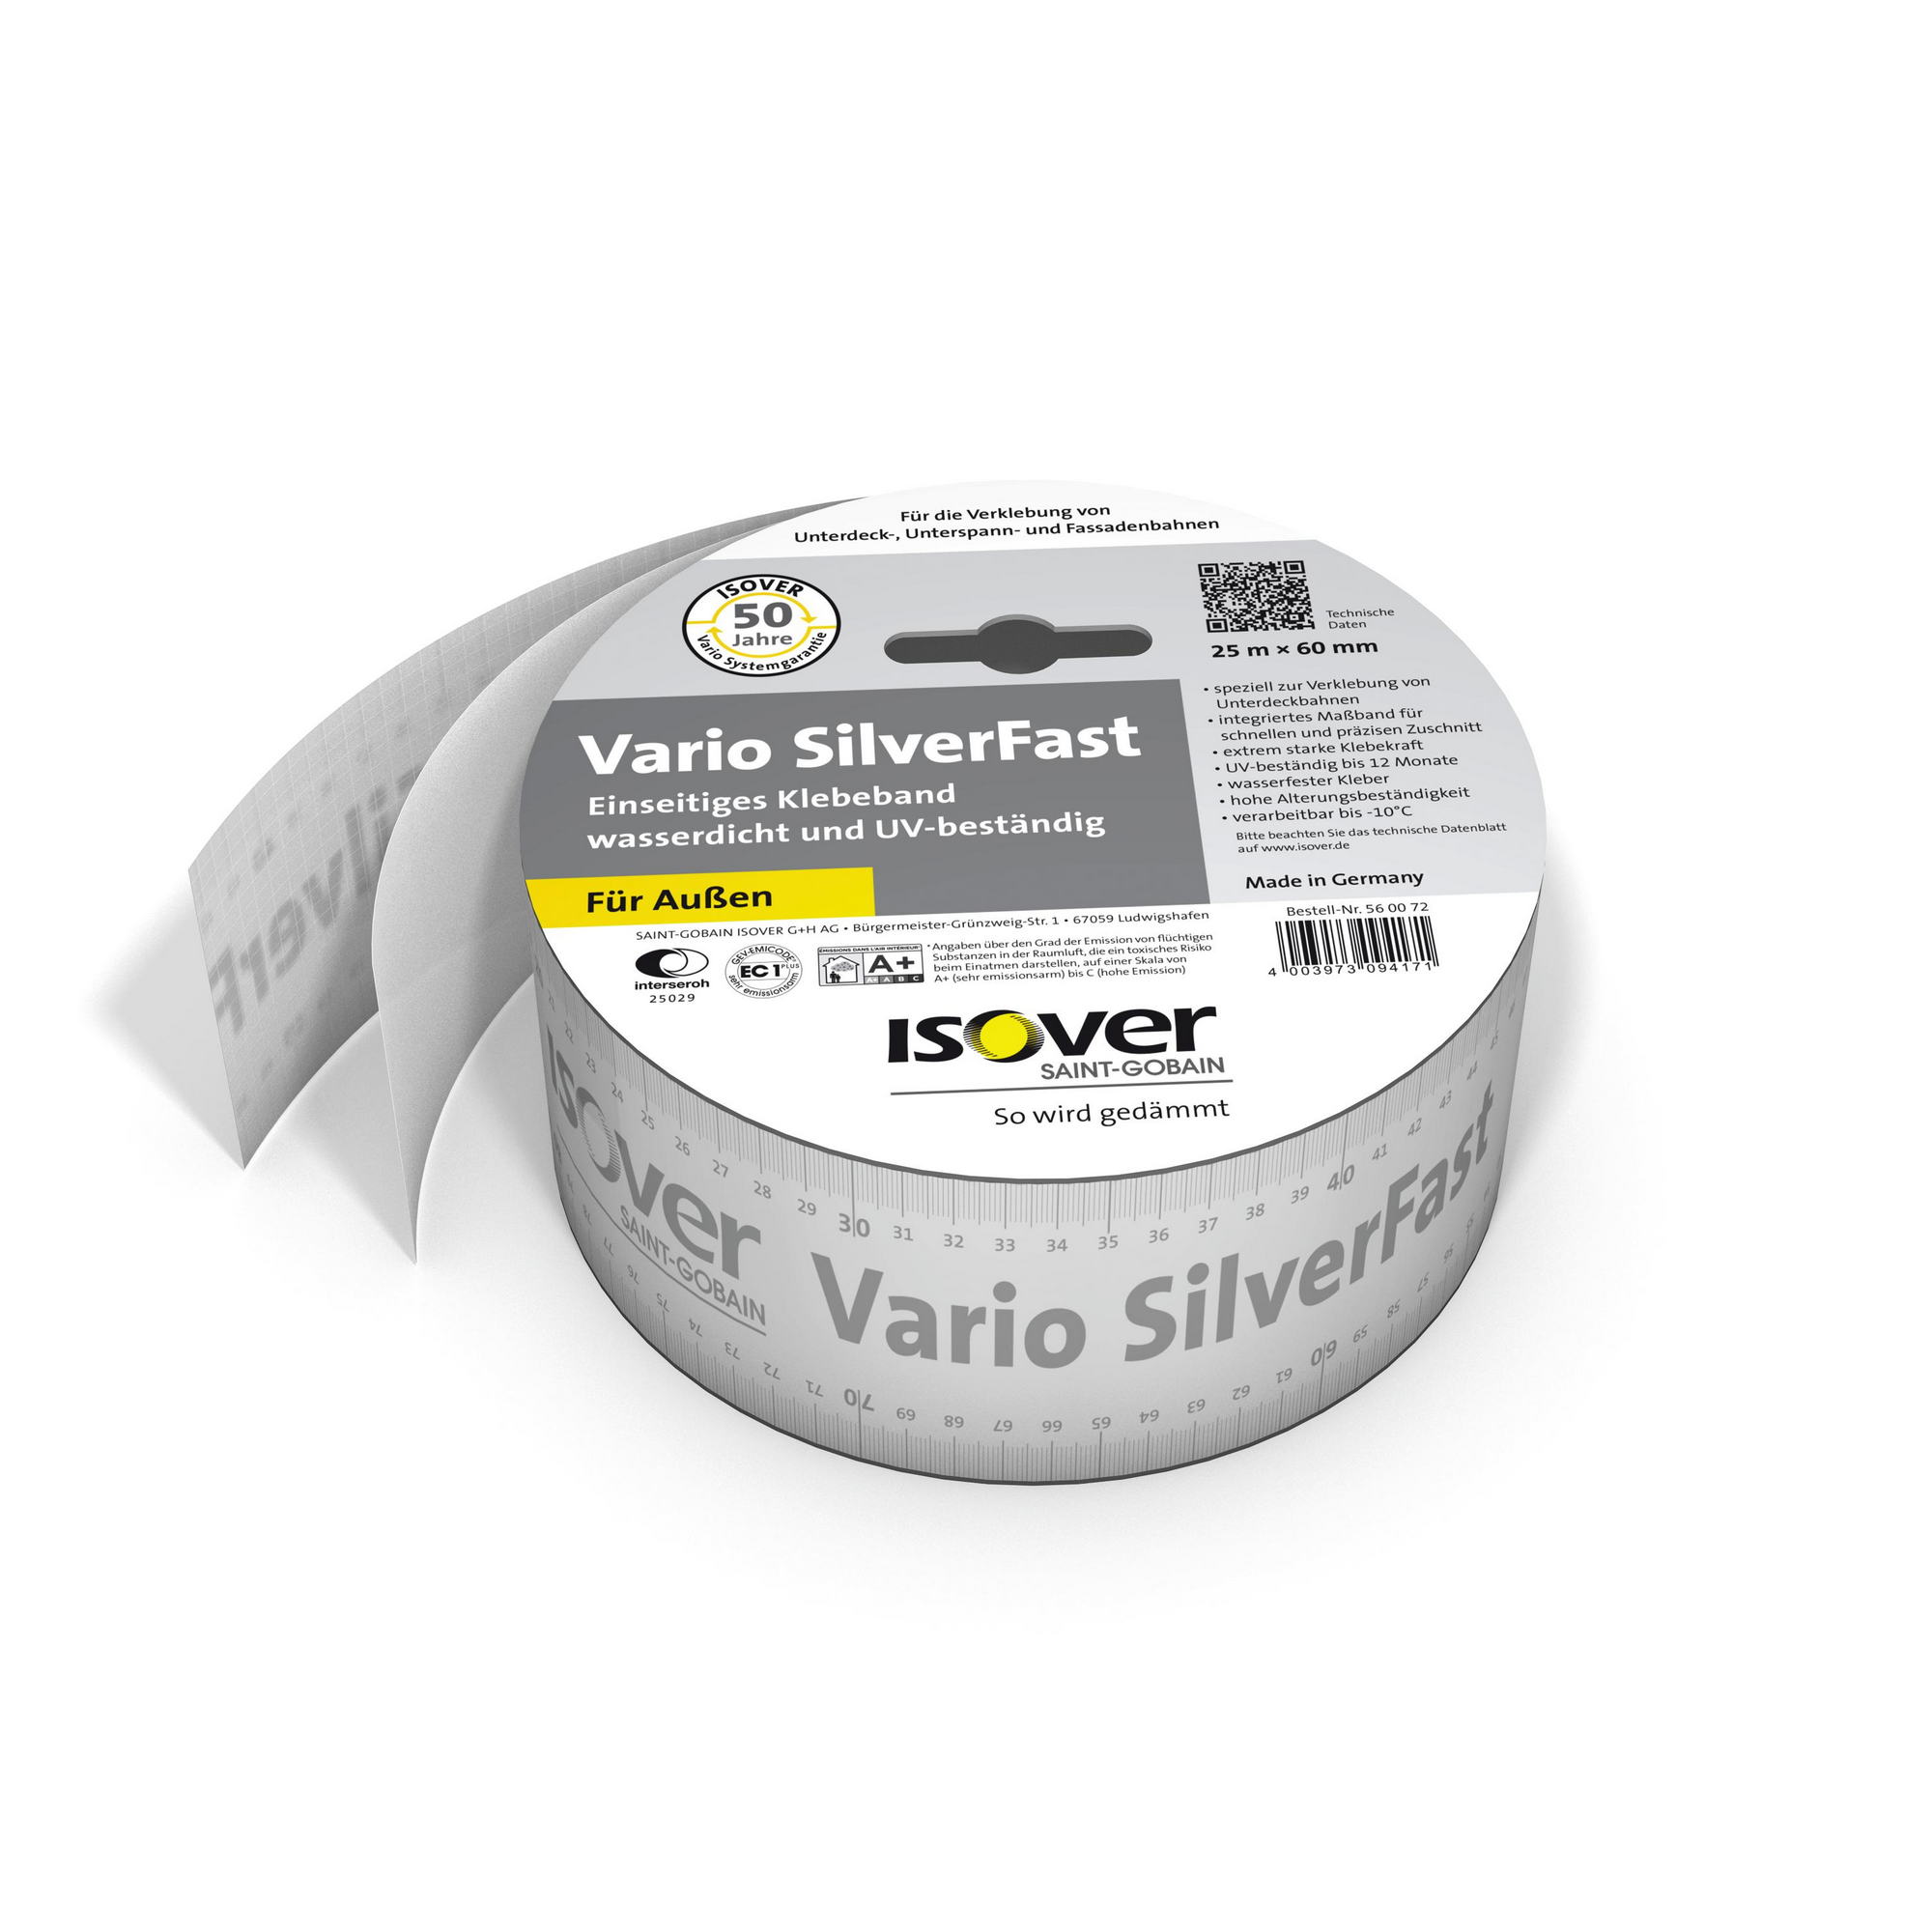 Klebeband 'Vario Silverfast' 60 mm x 25 m + product picture